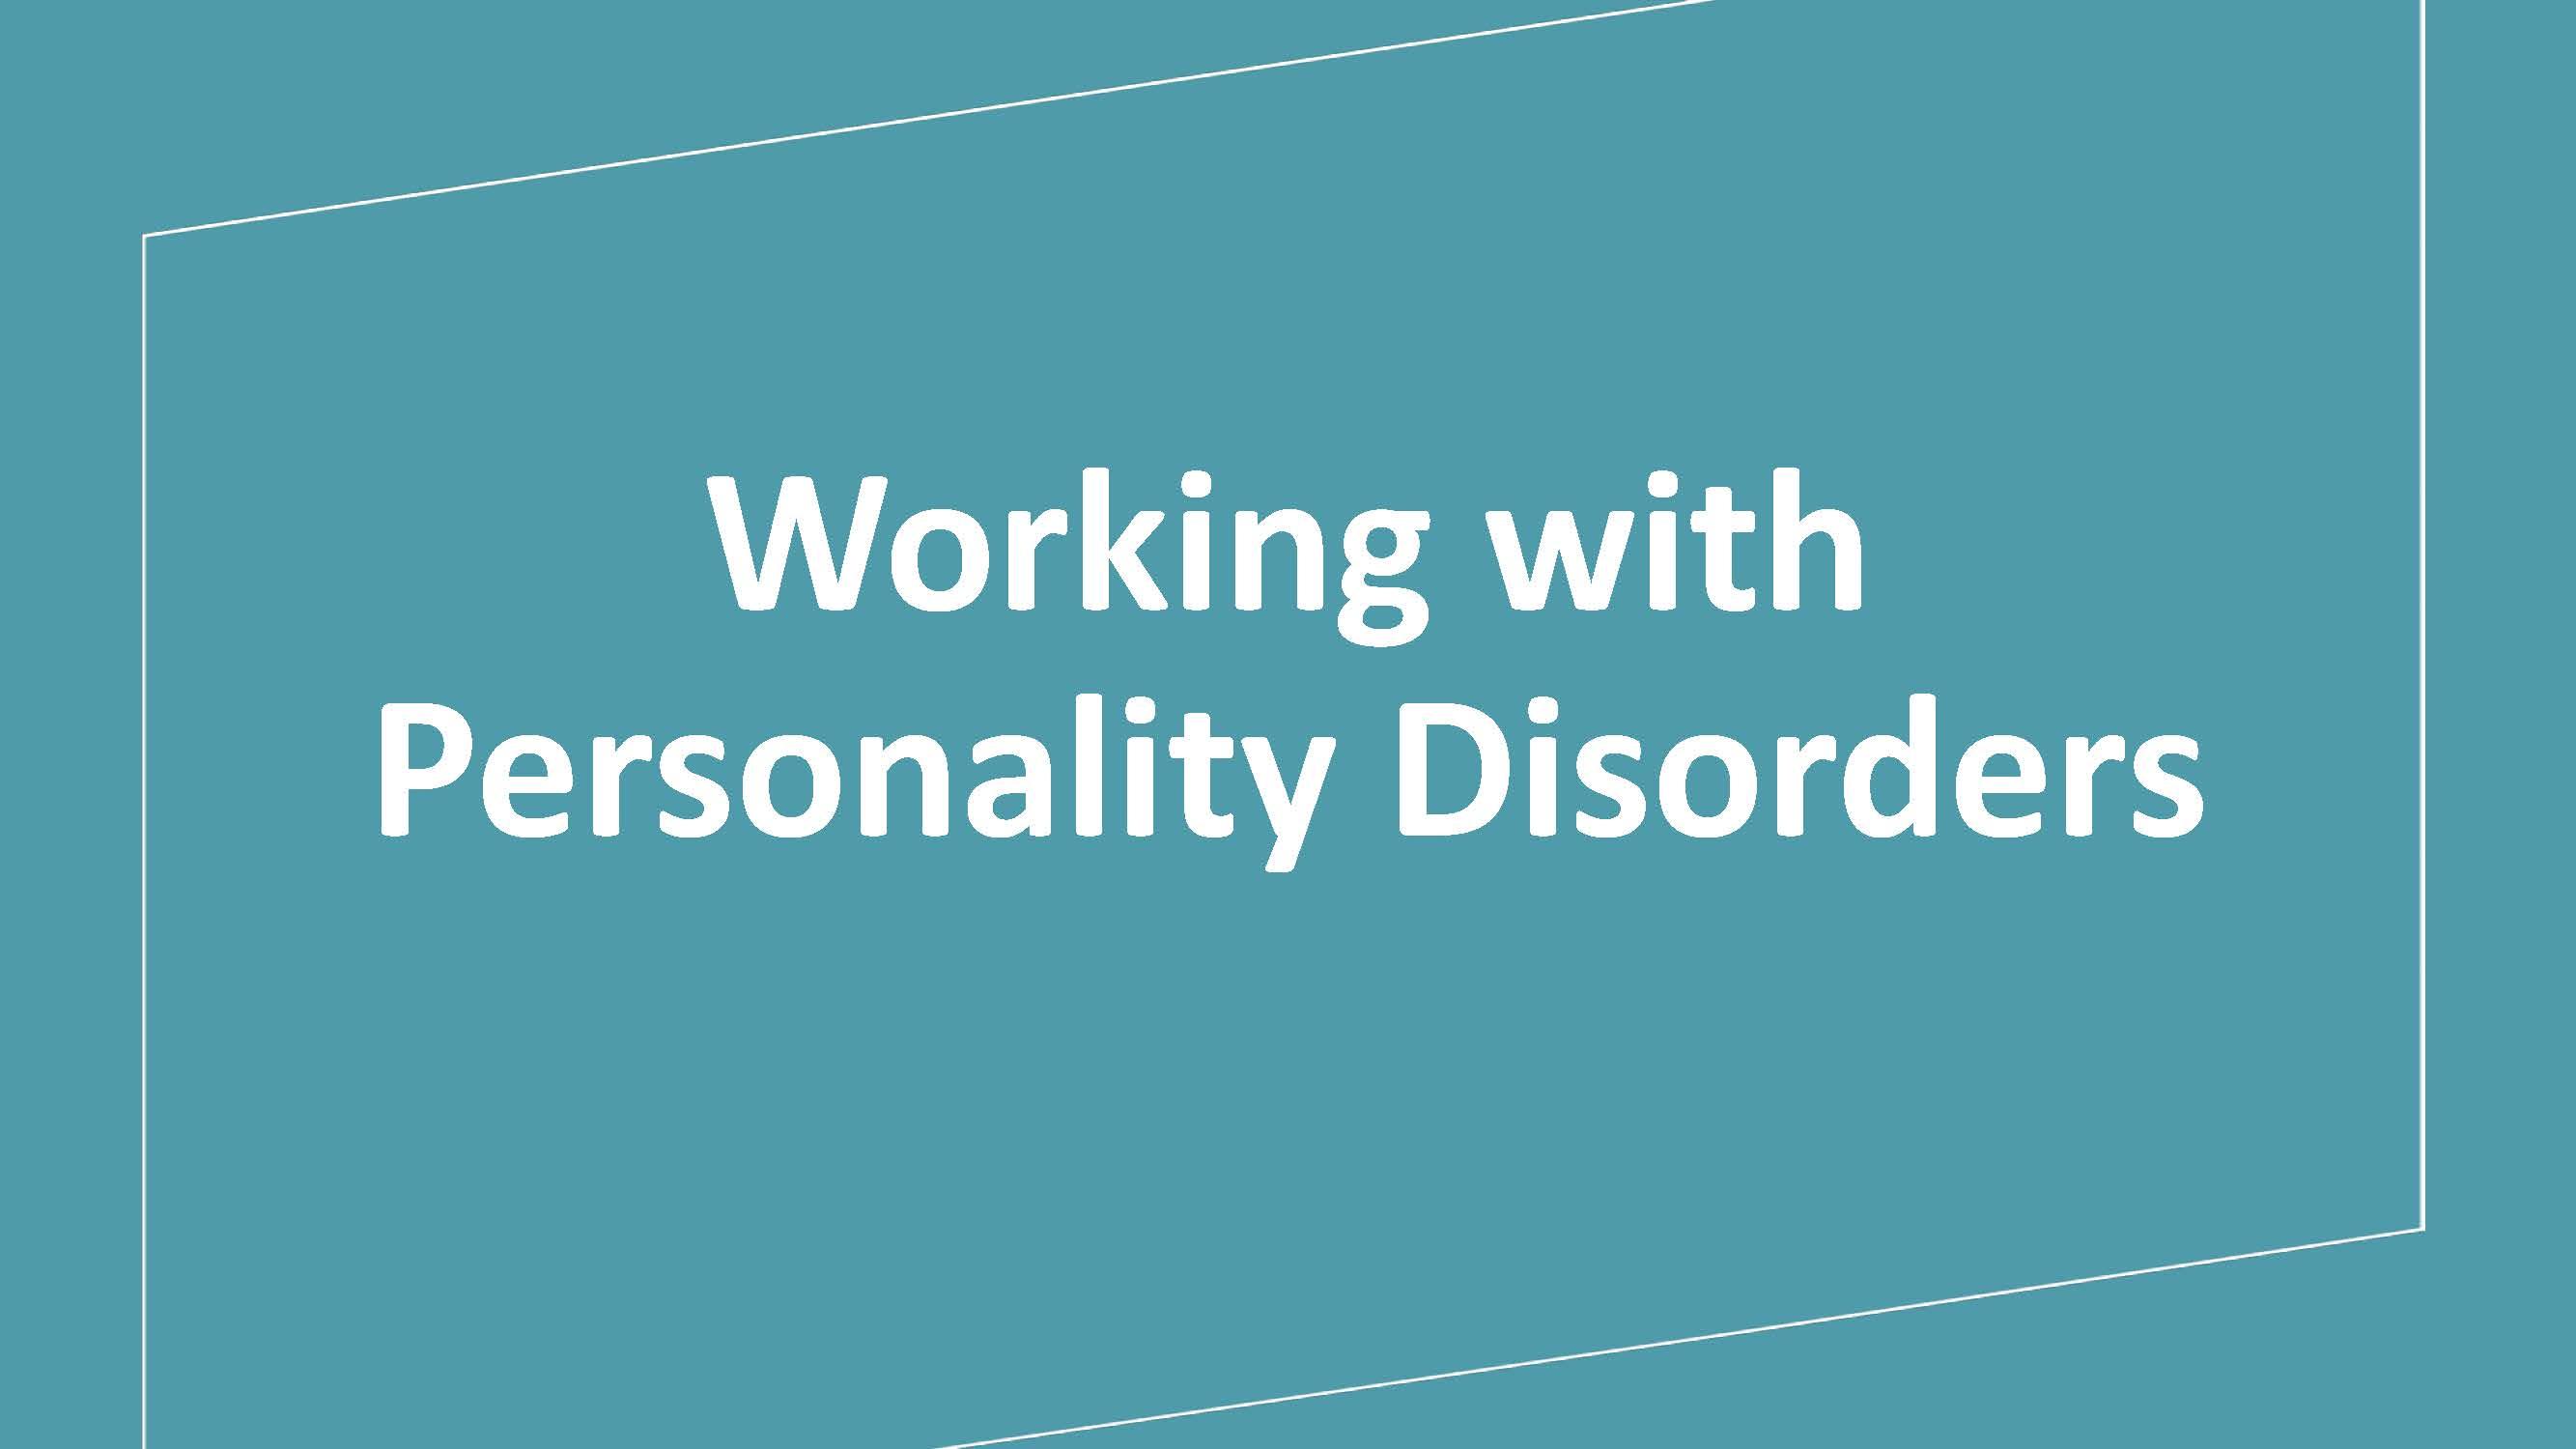 Working with Personality Disorders